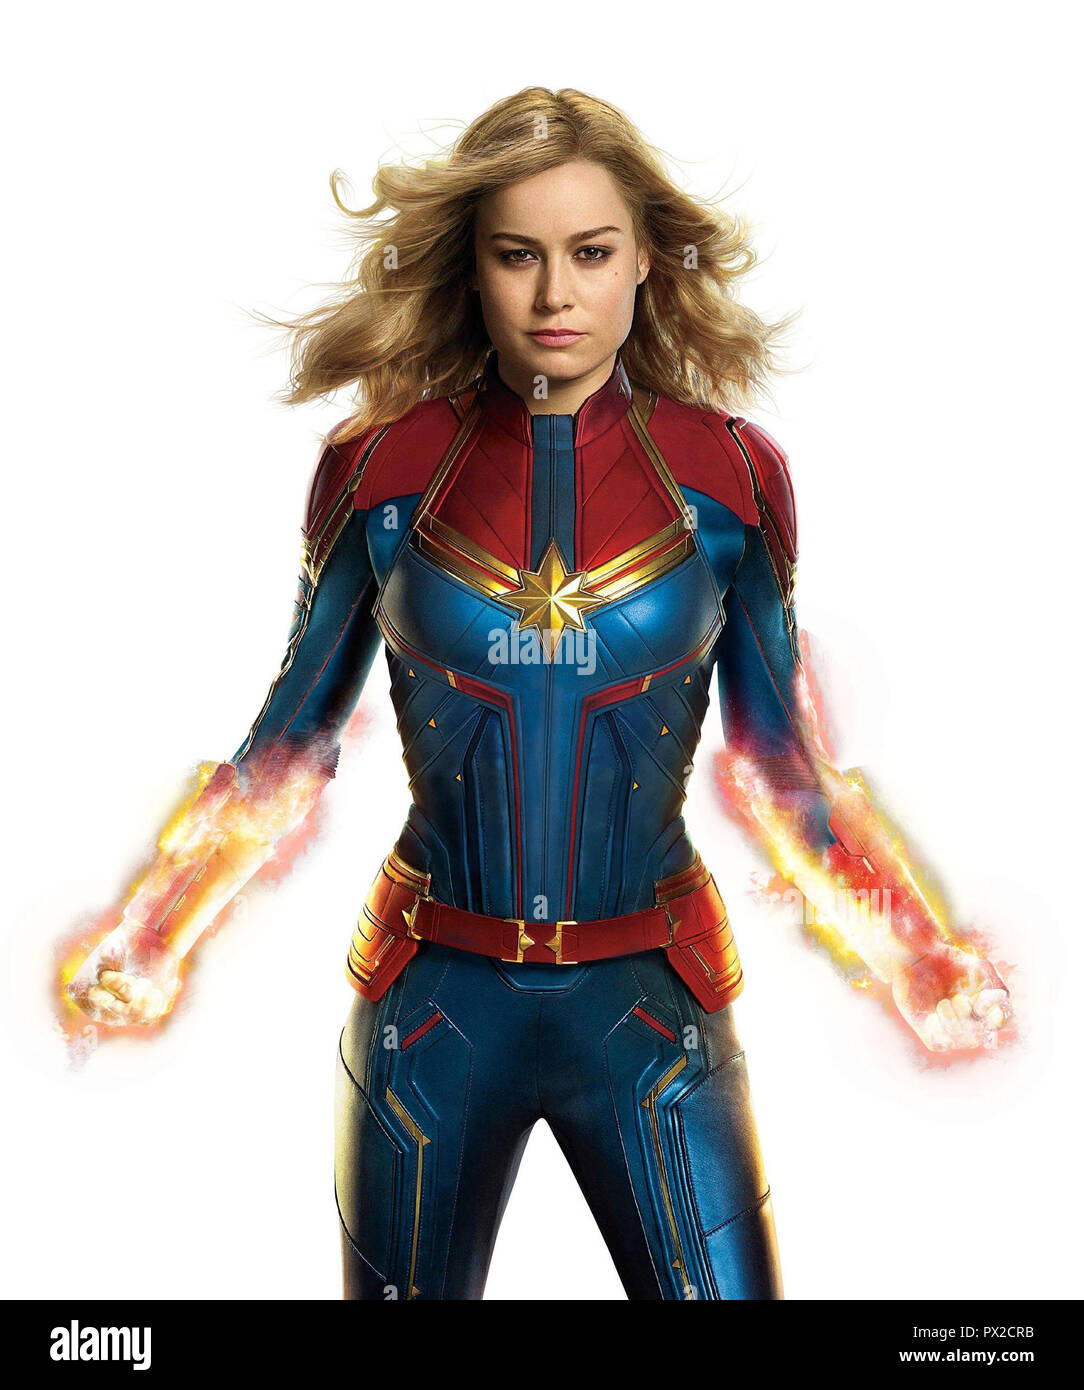 Captain marvel Cut Out Stock Images & Pictures - Alamy